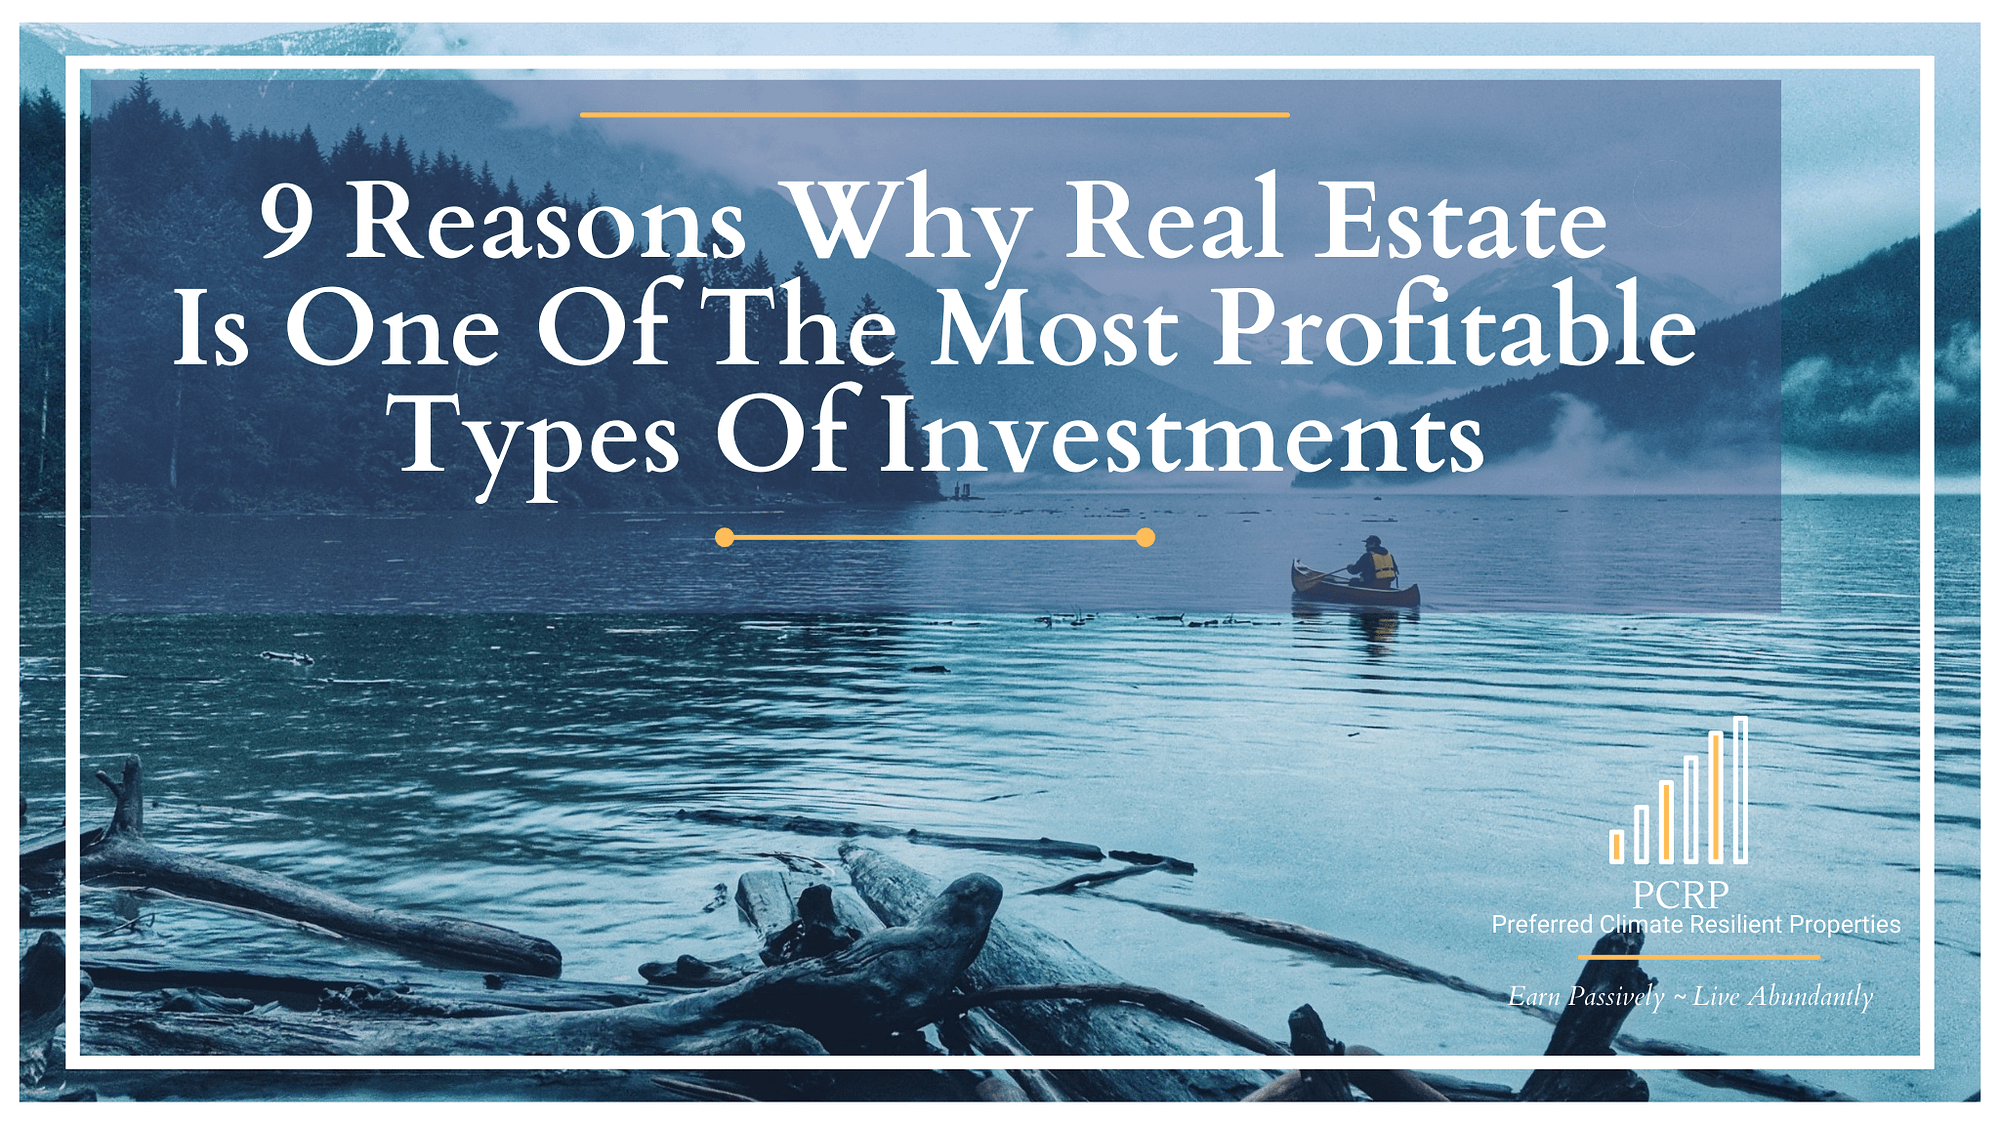 9 Reasons Why Real Estate Is One Of The Most Profitable Types of Investments